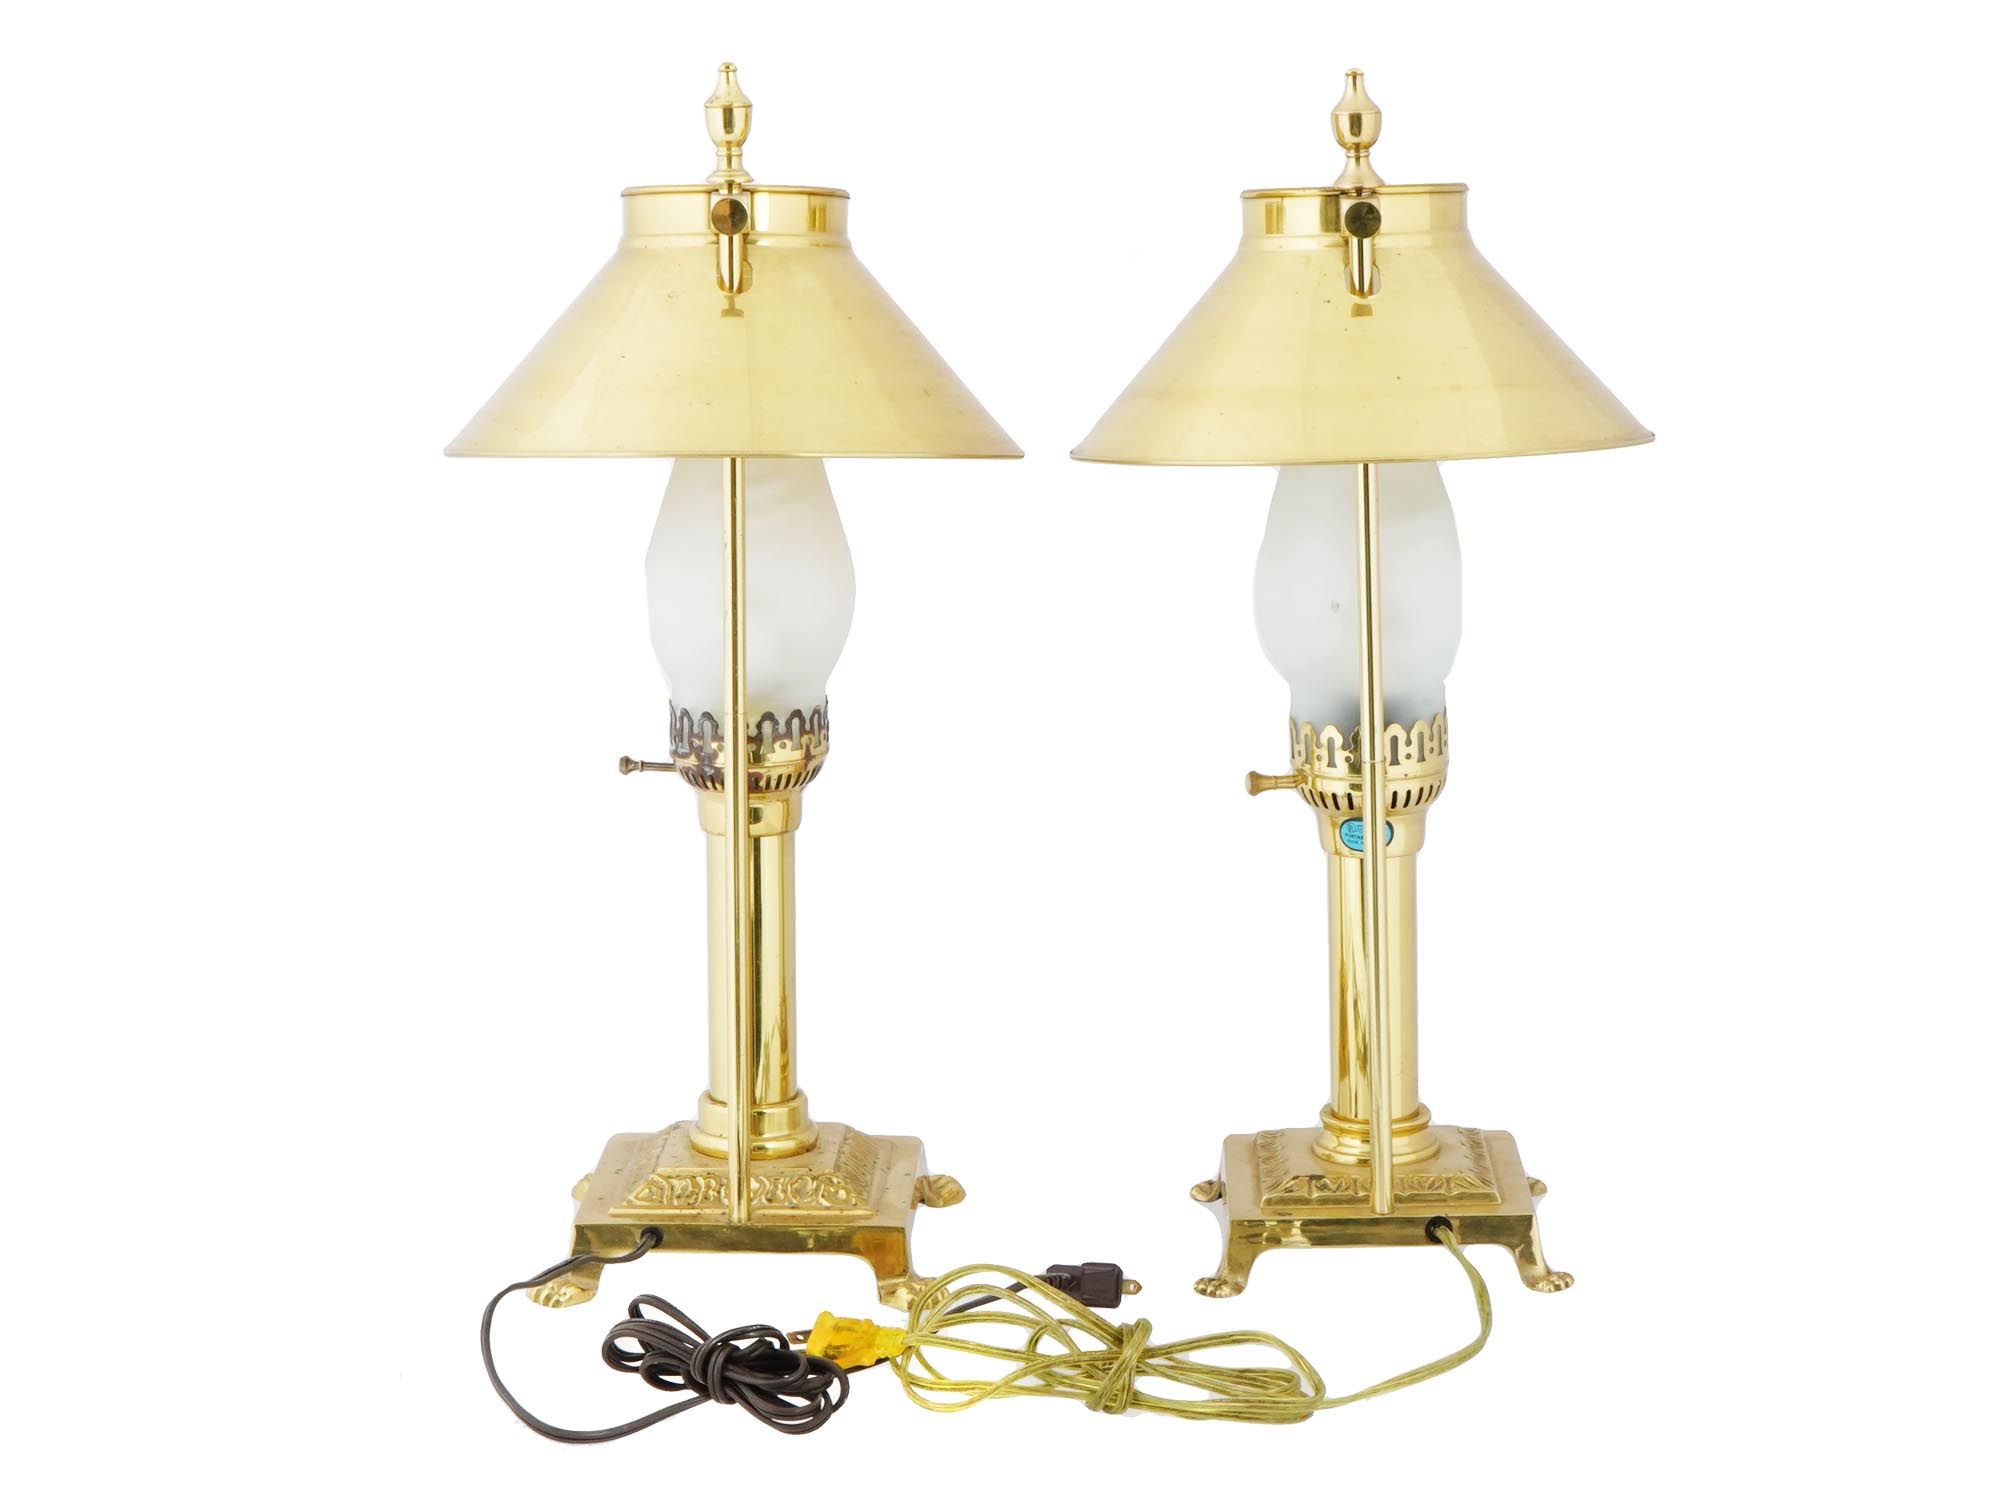 VINTAGE GILT BRASS ORIENT EXPRESS TABLE LAMPS PIC-1